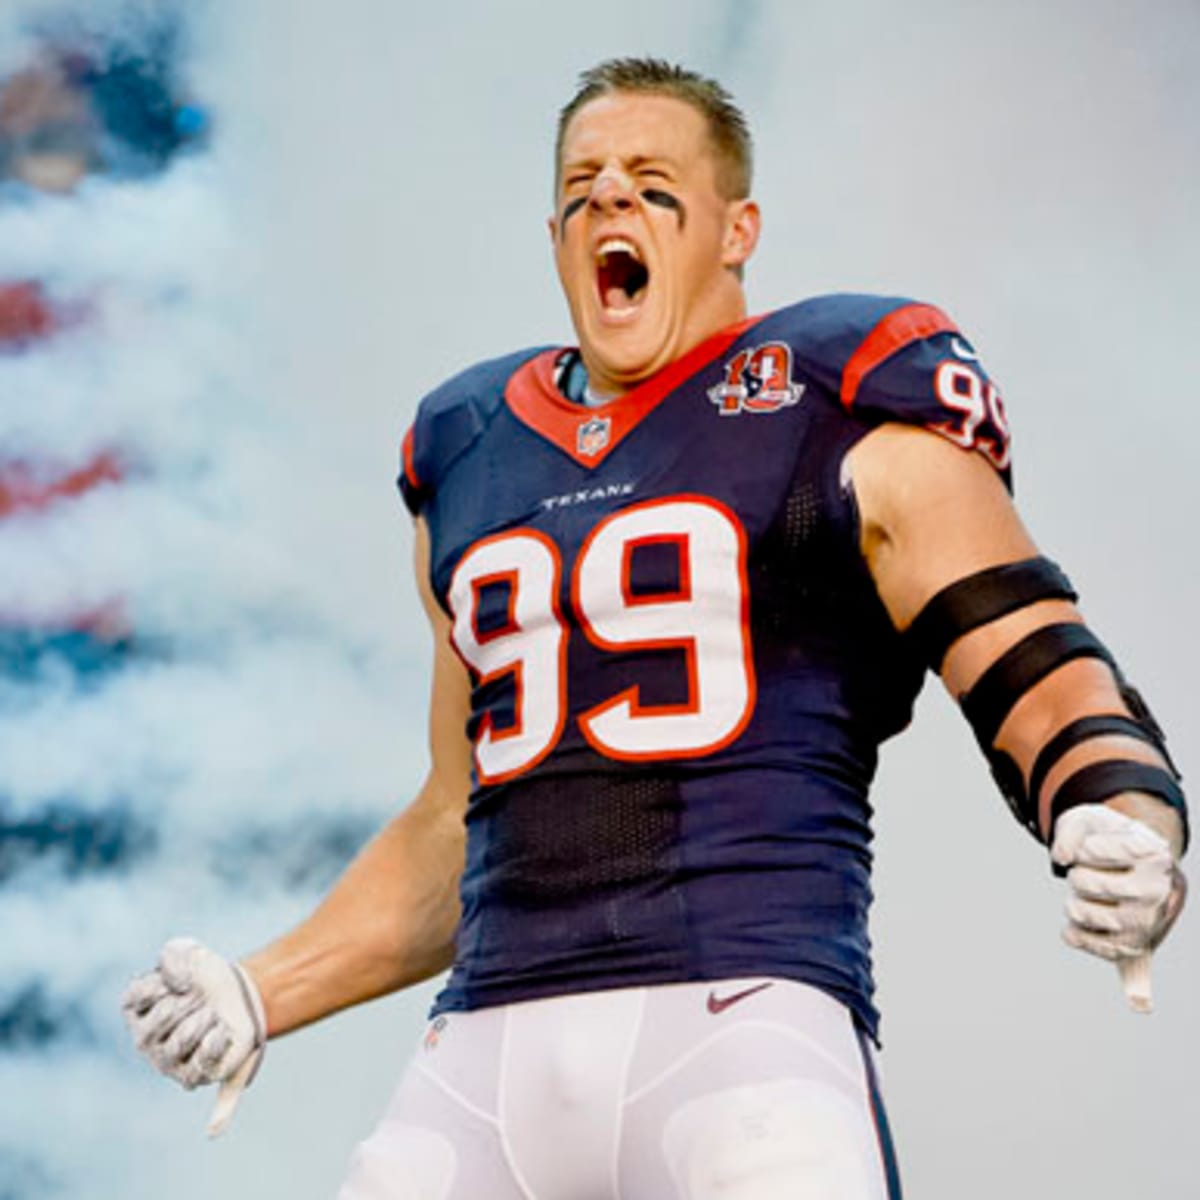 NFL players say J.J. Watt is the best NFL player. NFL players are